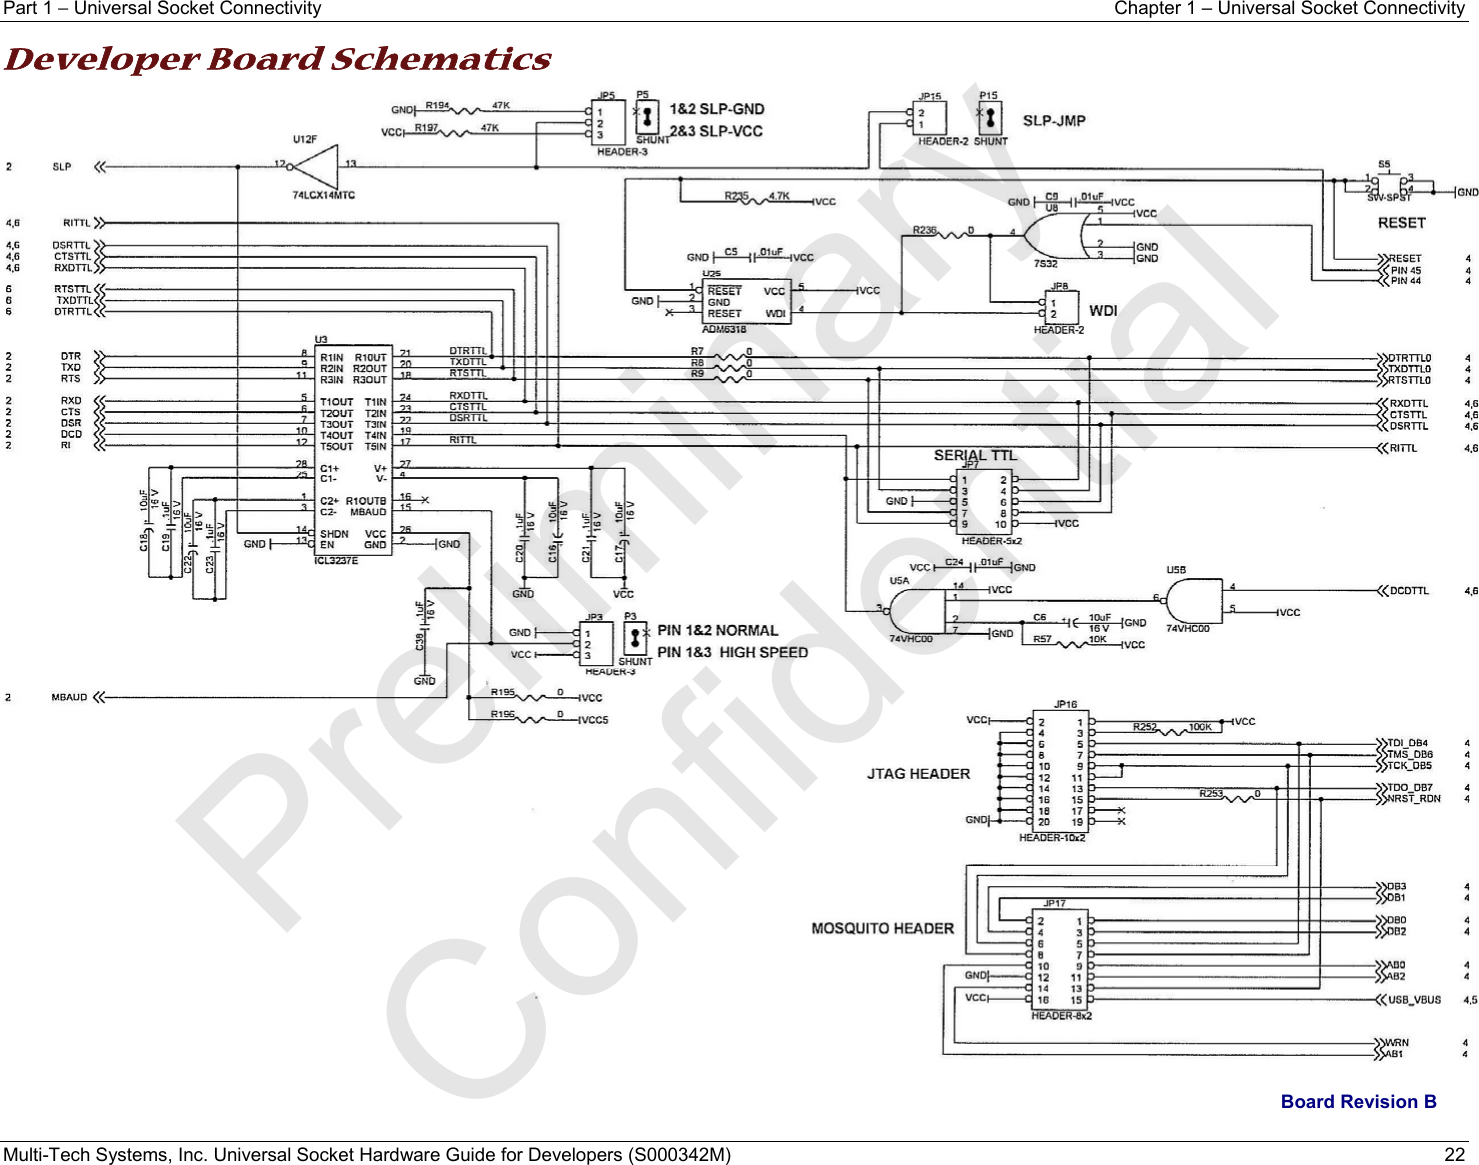 Part 1 − Universal Socket Connectivity  Chapter 1 – Universal Socket Connectivity Multi-Tech Systems, Inc. Universal Socket Hardware Guide for Developers (S000342M)  22  Developer Board Schematics   Board Revision B  Preliminary  Confidential